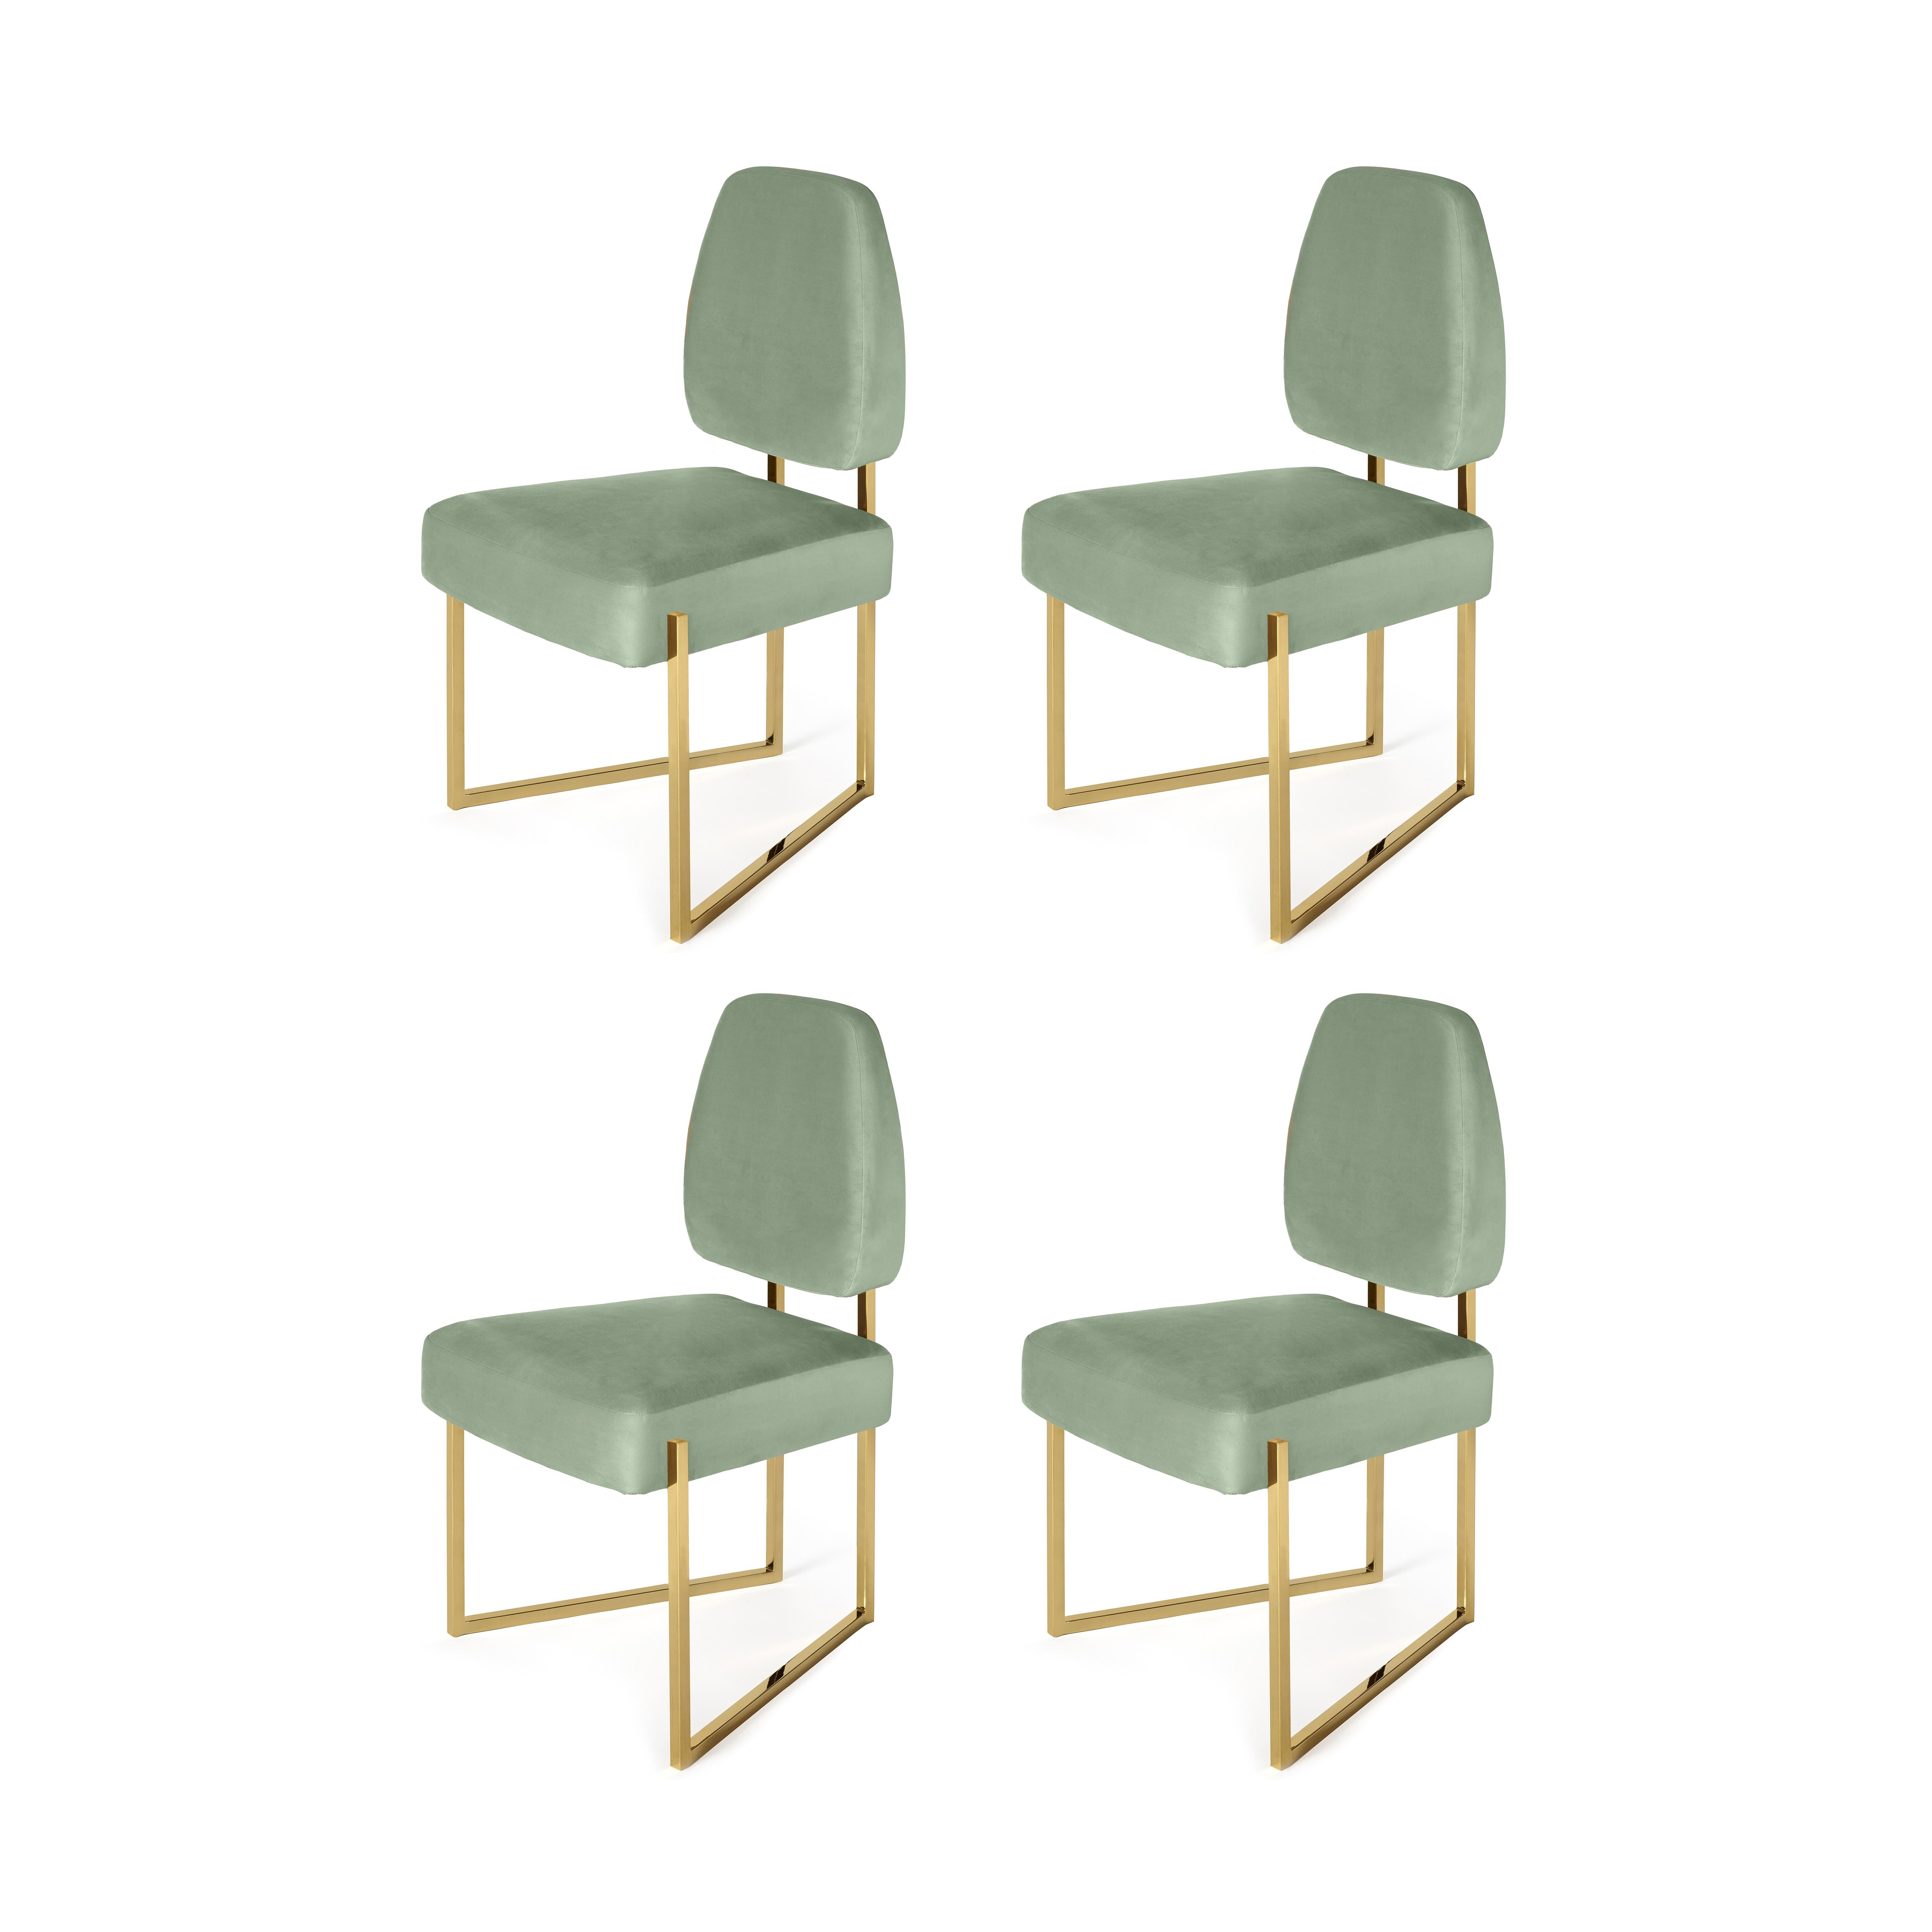 Set of 4 Perspective Dining Chair II by InsidherLand
Dimensions: D 58 x W 52 x H 96 cm.
Materials: stainless steel finished with golden bath, fabric InsidherLand Cotton Velvet Ref. 7046
10 kg.
Available in different fabrics.

Our perception of space